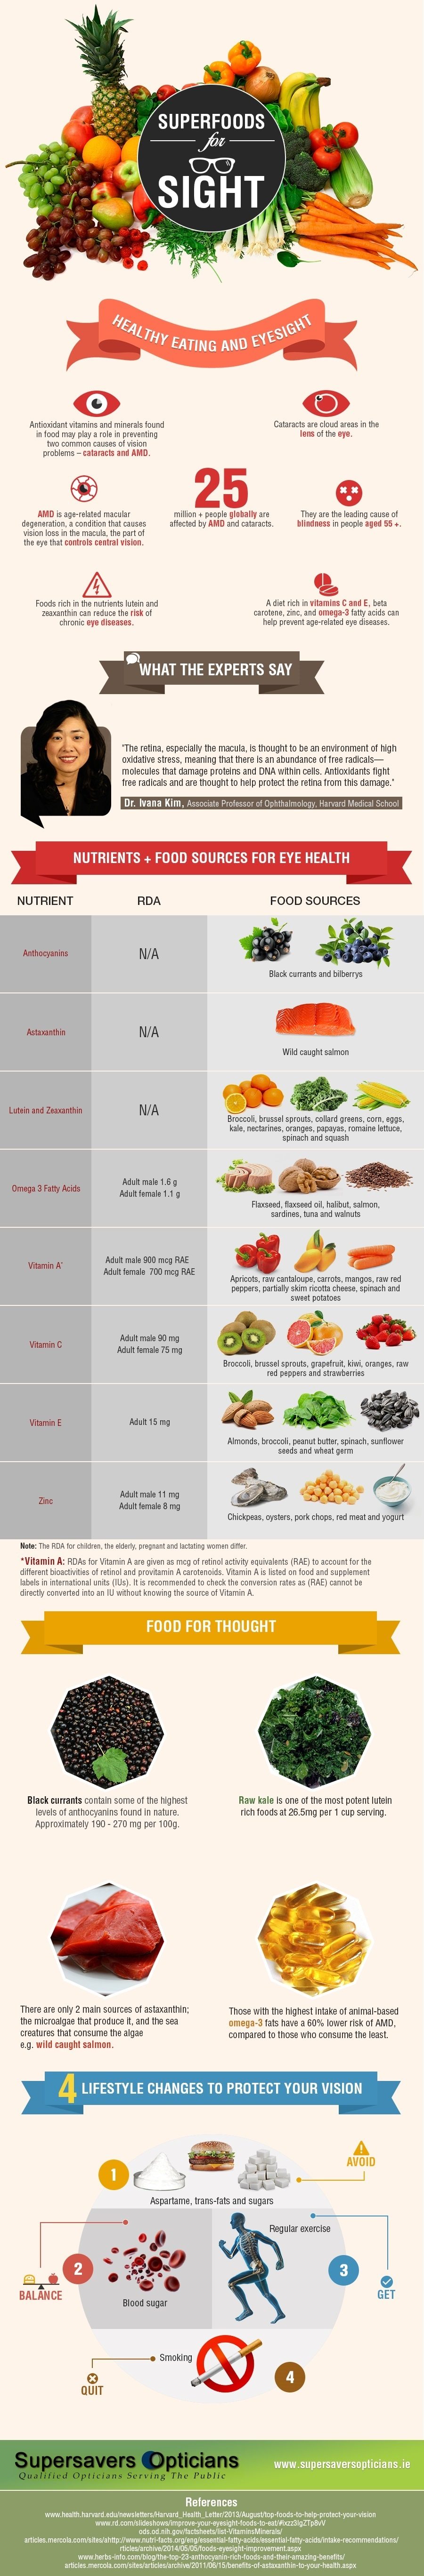 Superfoods-for-Sight-Infographic